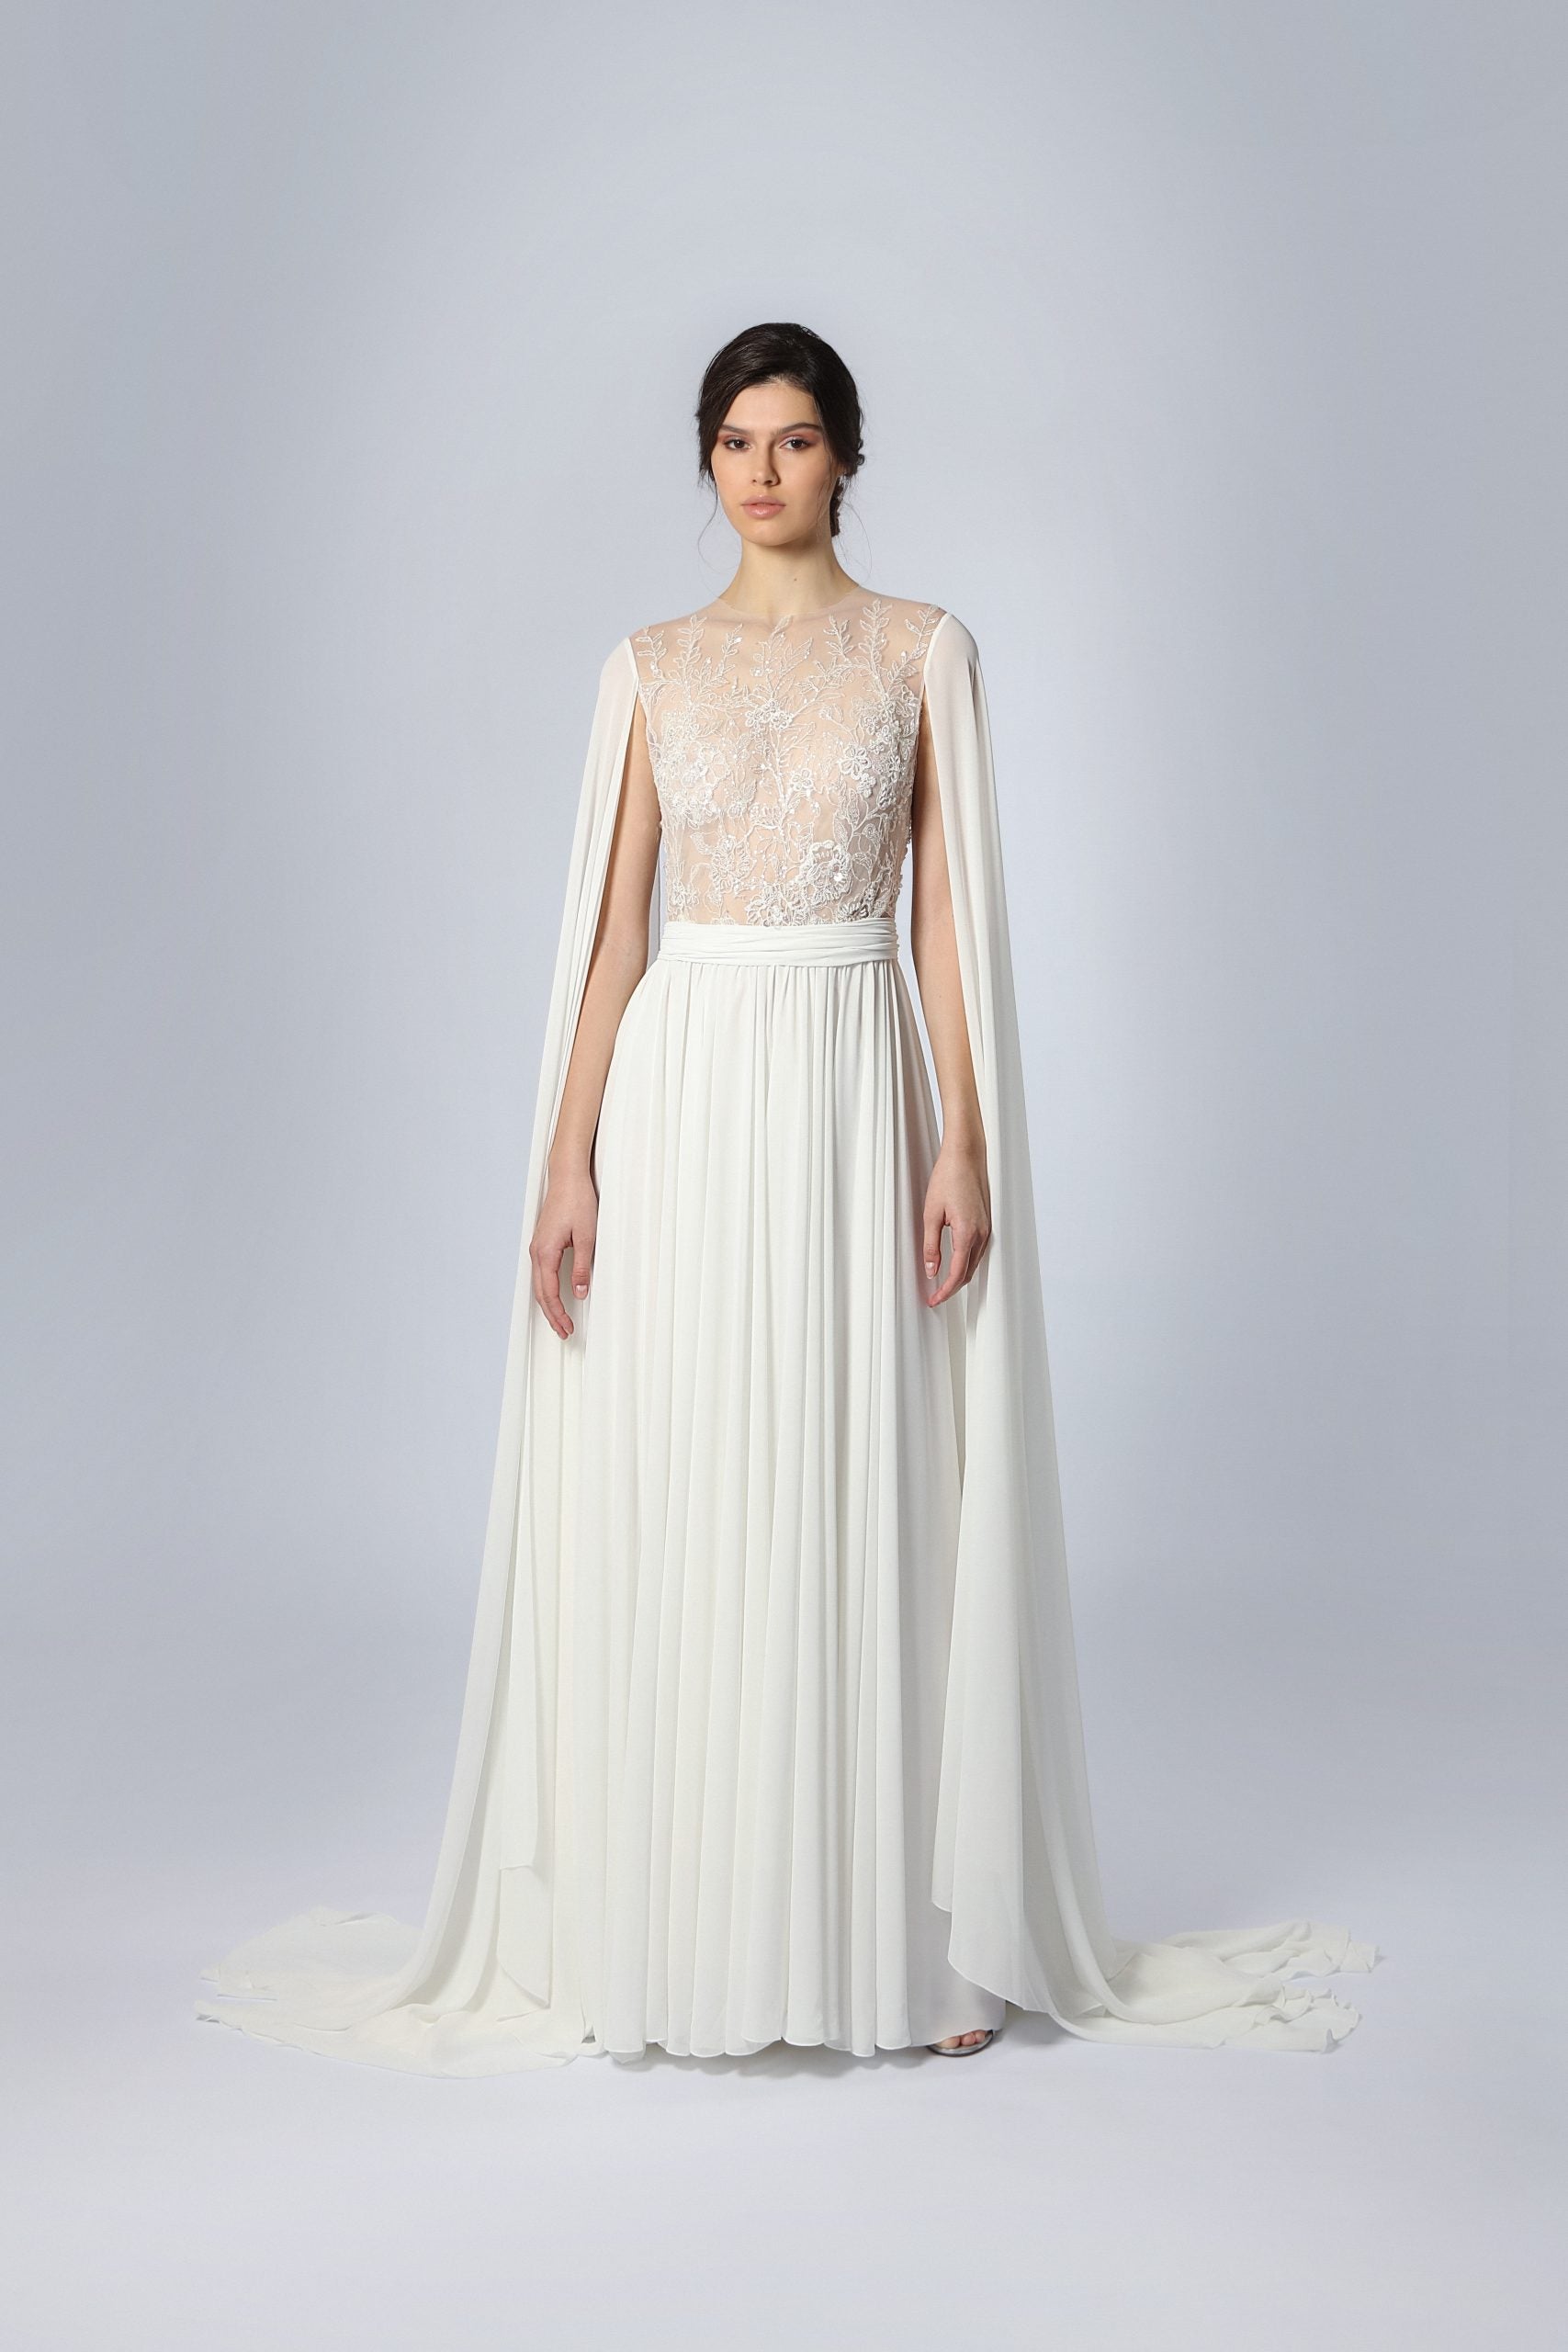 Ethereal A-Line Gown With Cape by Tony Ward - Image 1